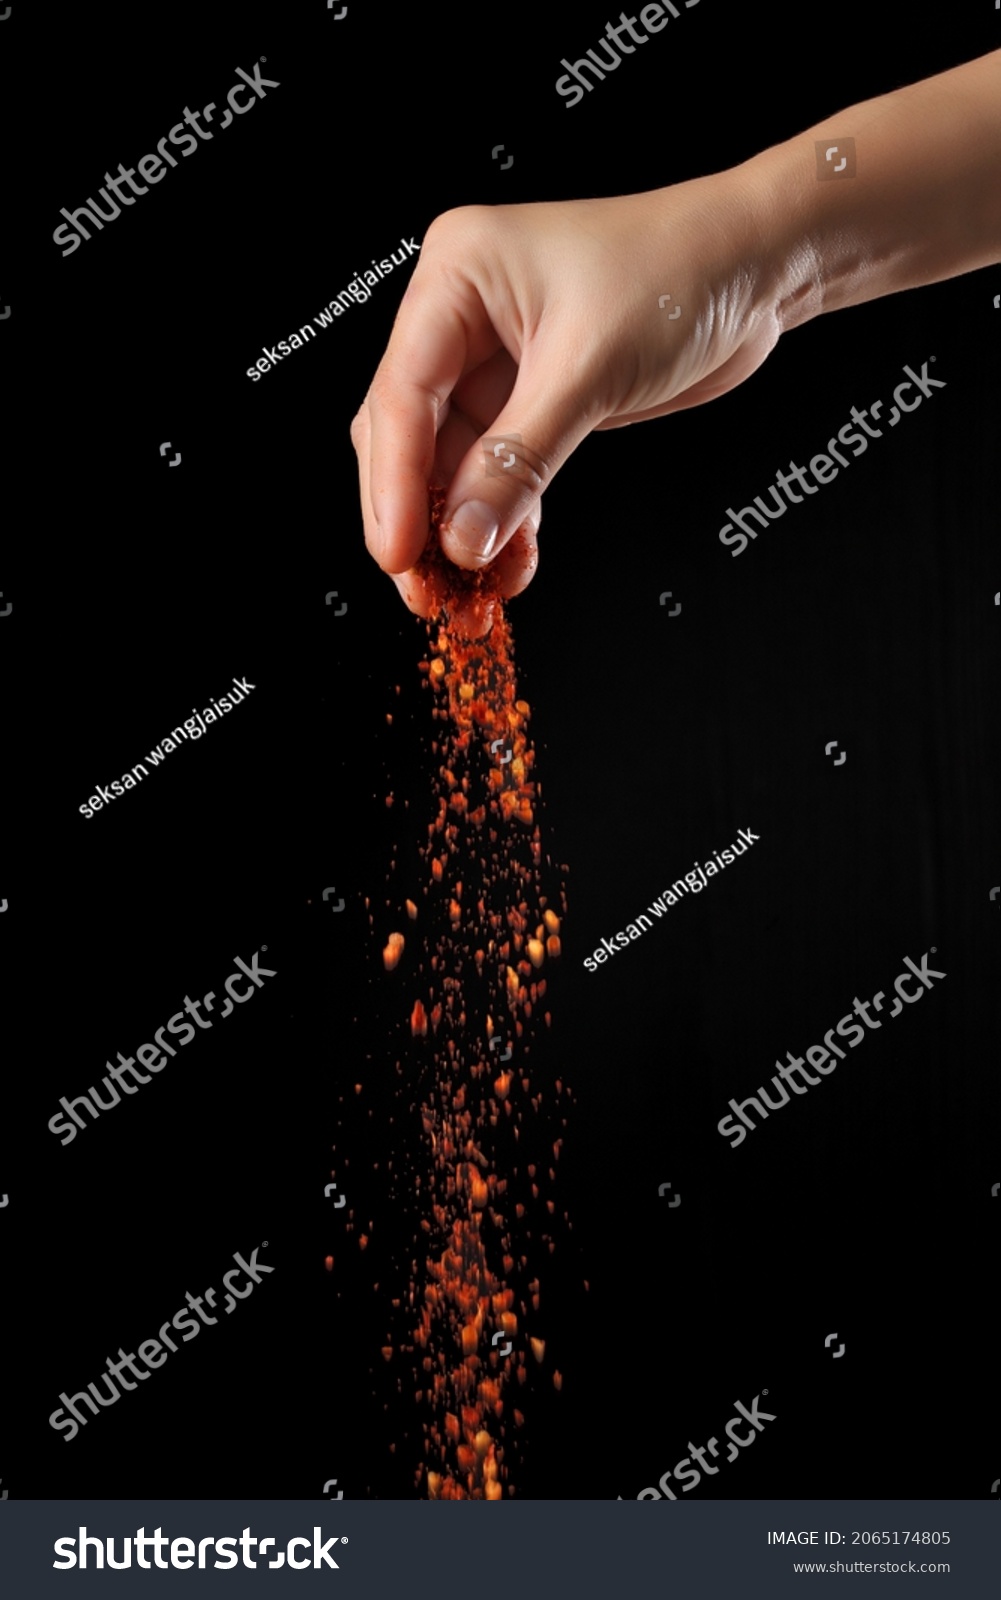 Hand sprinkling cayenne pepper isolated on black background #2065174805